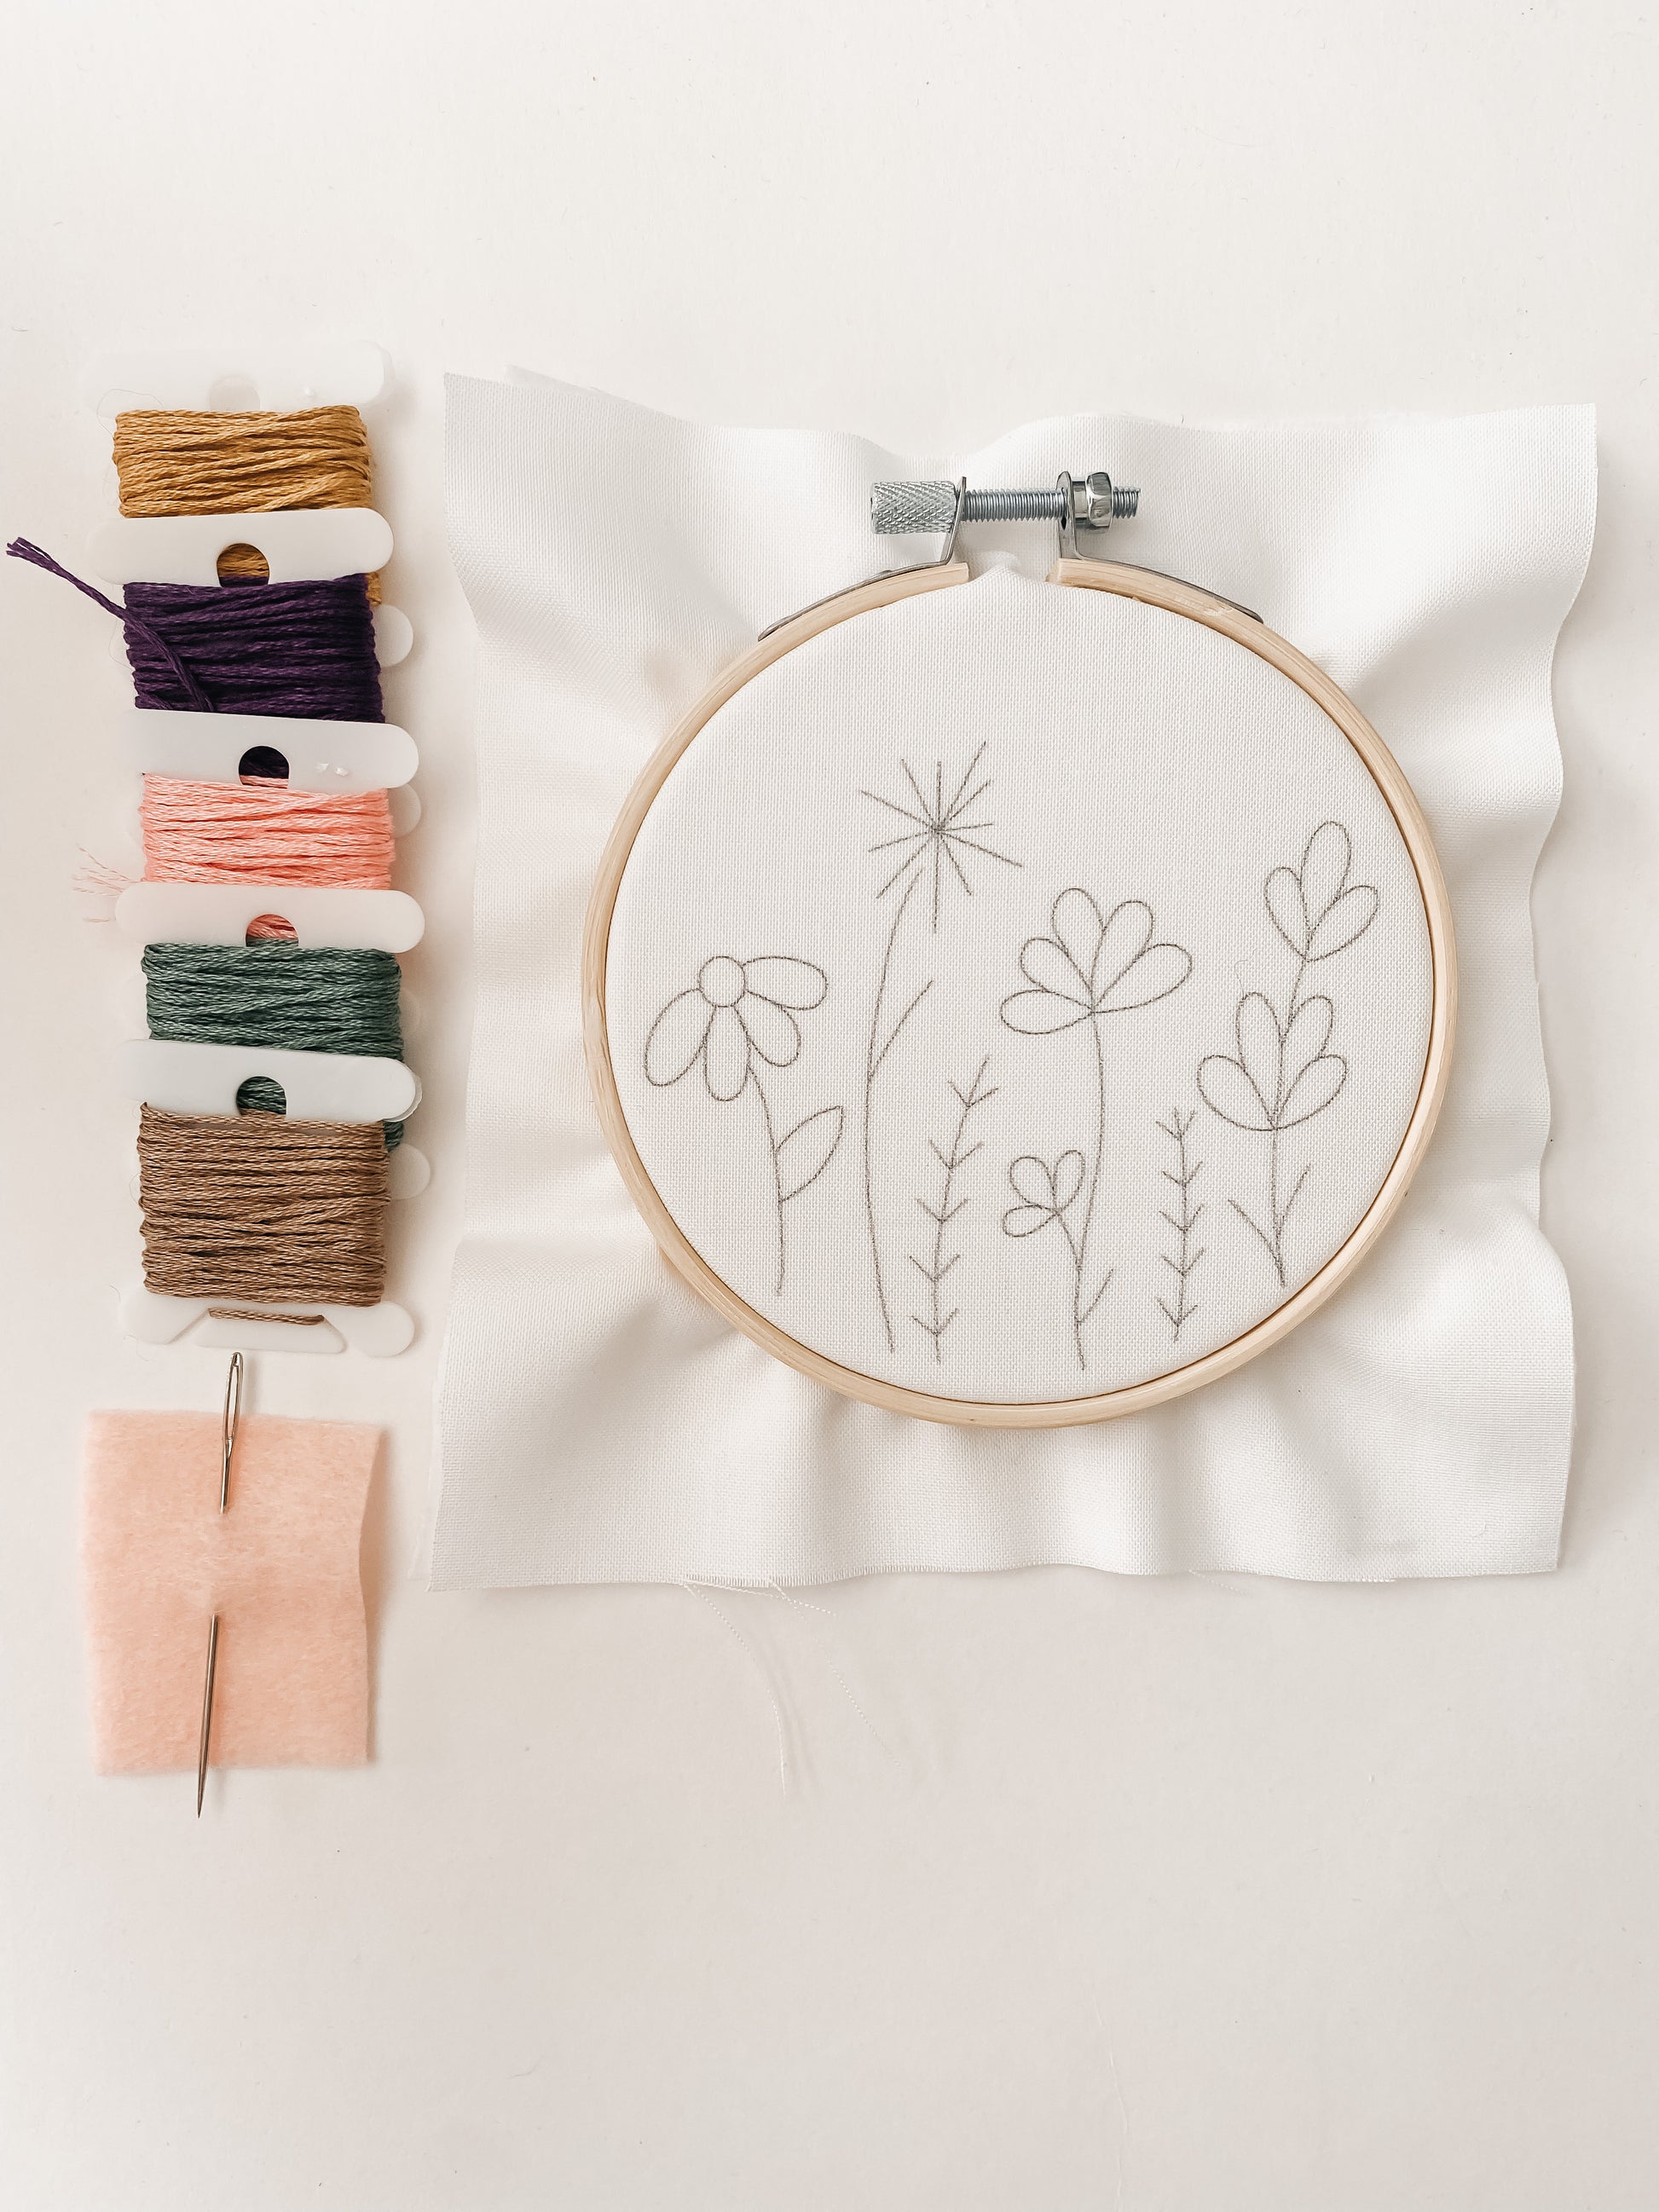 Kids Embroidery Kit: The 5 Sets for Fun and Productive Bonding With Your  Not So Little One - Threadstop